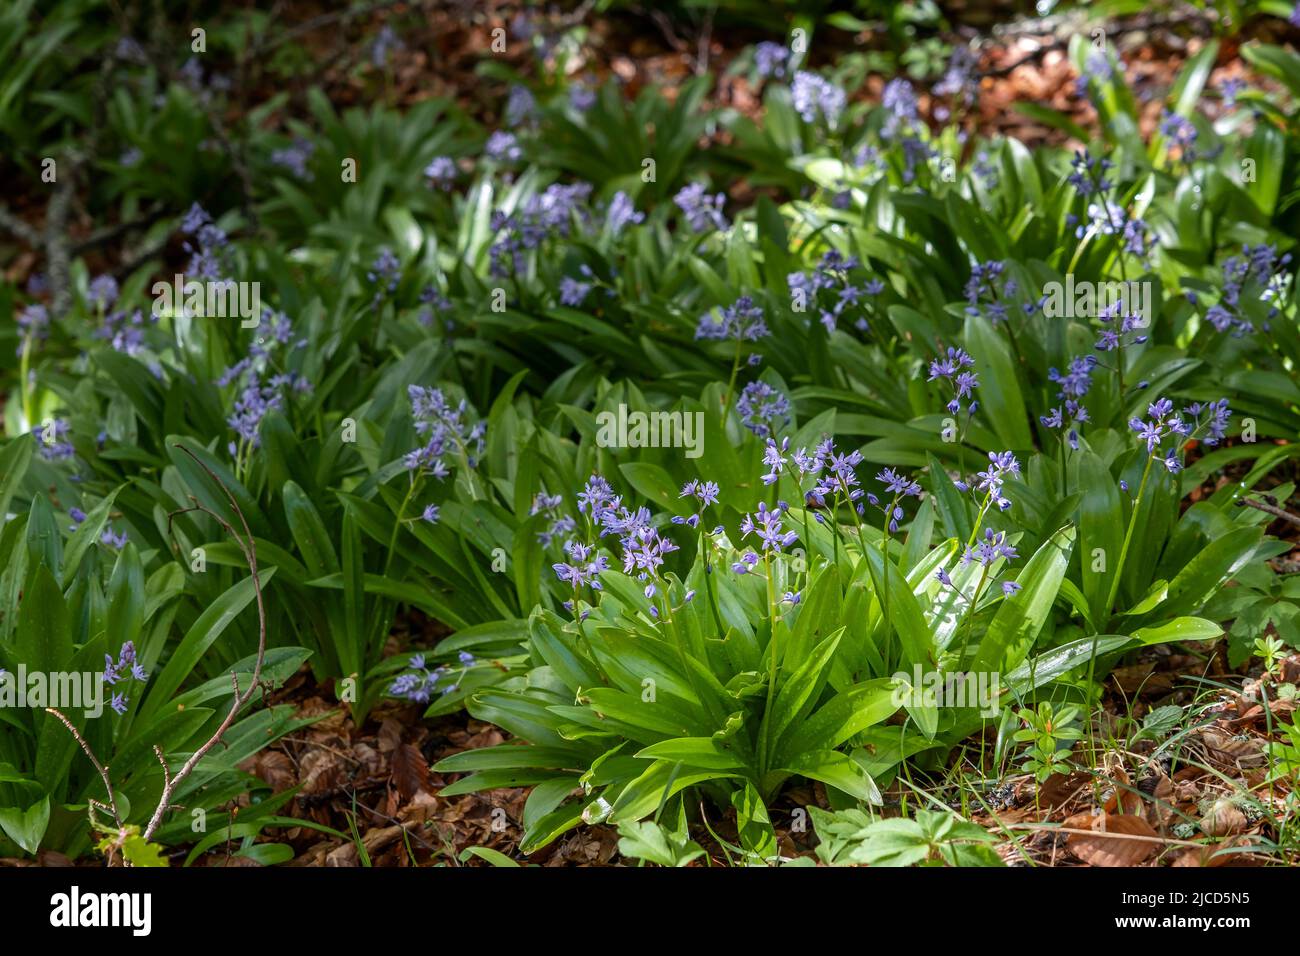 Pyrenean squill ( Scilla lilio-hyacinthus) with blooming purple flowers growing on a beech trees woodland in the north of Spain Stock Photo